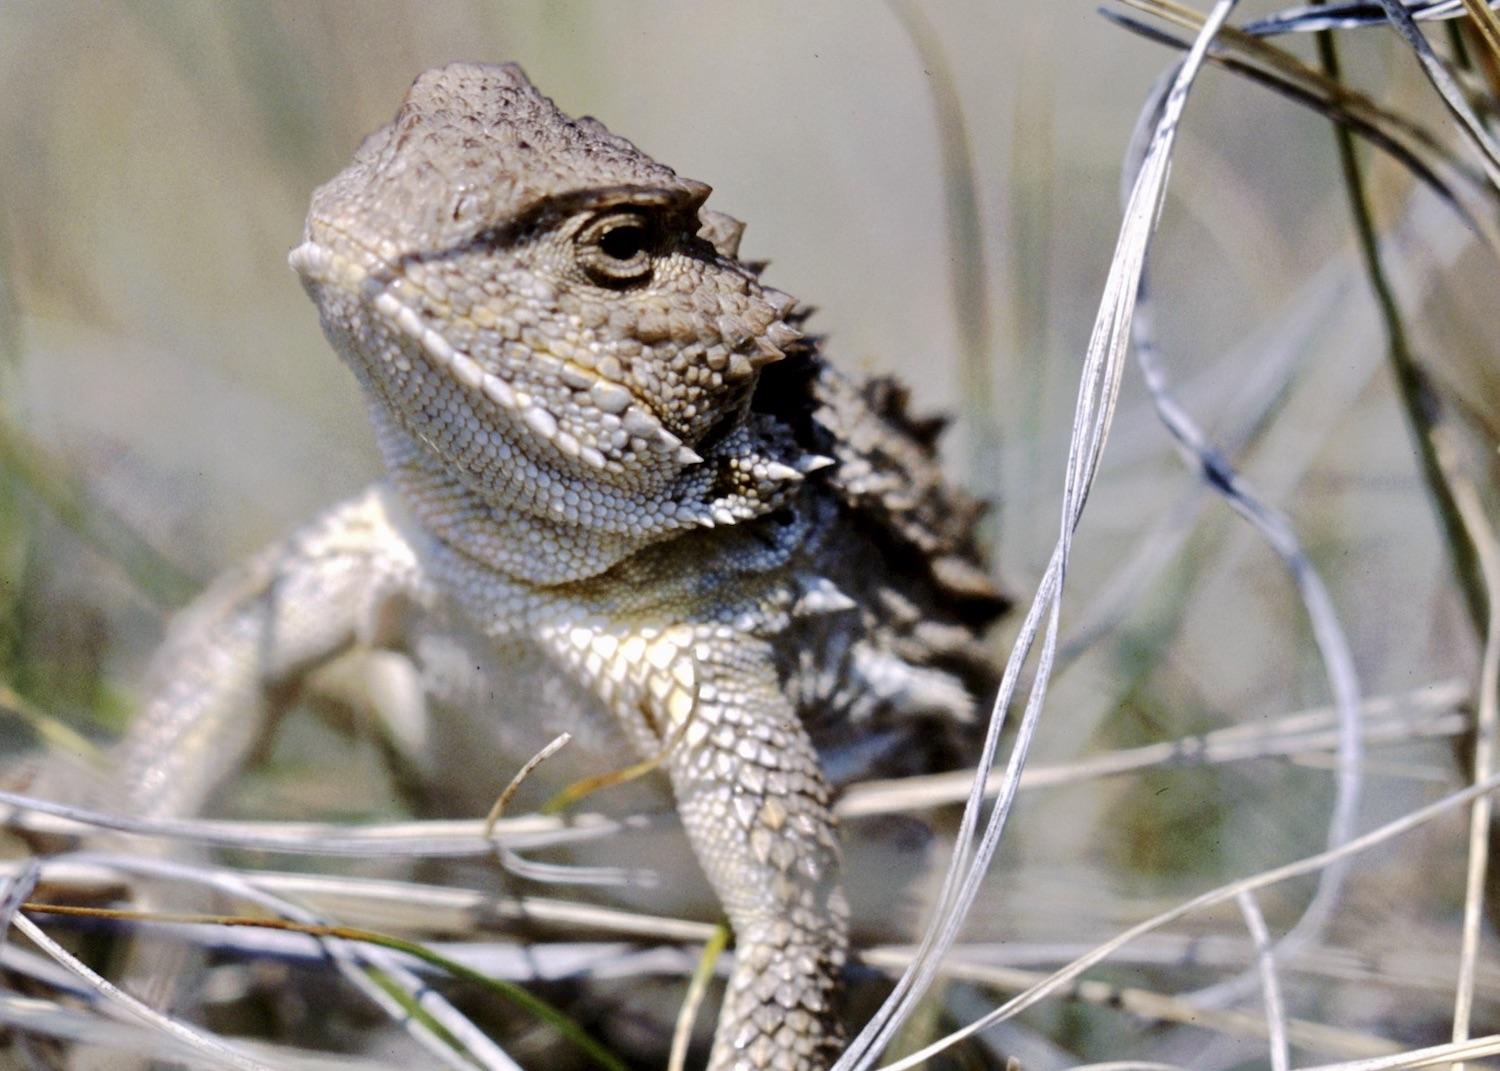 Greater Short-horned Lizards may shoot blood from their eyes when threatened, but that is rare to see.